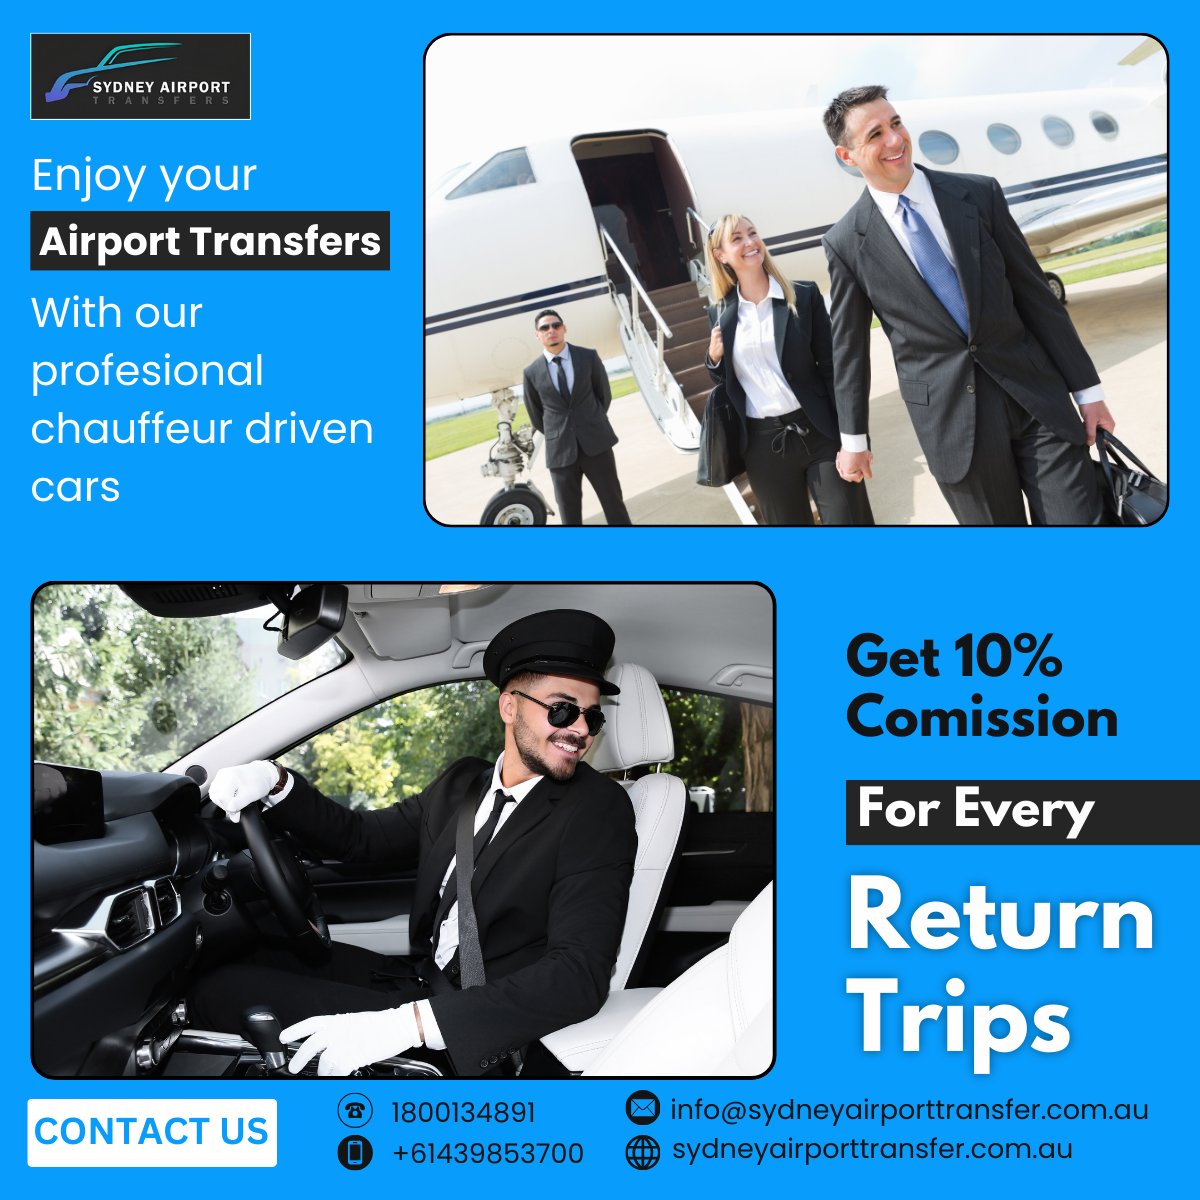 Experience reliable airport transfers with our expert chauffeurs and earn 10% commission on every return trip.
To book limo from our website - 
sydneyairporttransfer.com.au
#airportlimousine #corporatecarservices #weddings #limohire #corporatetravel #sydneylimousine